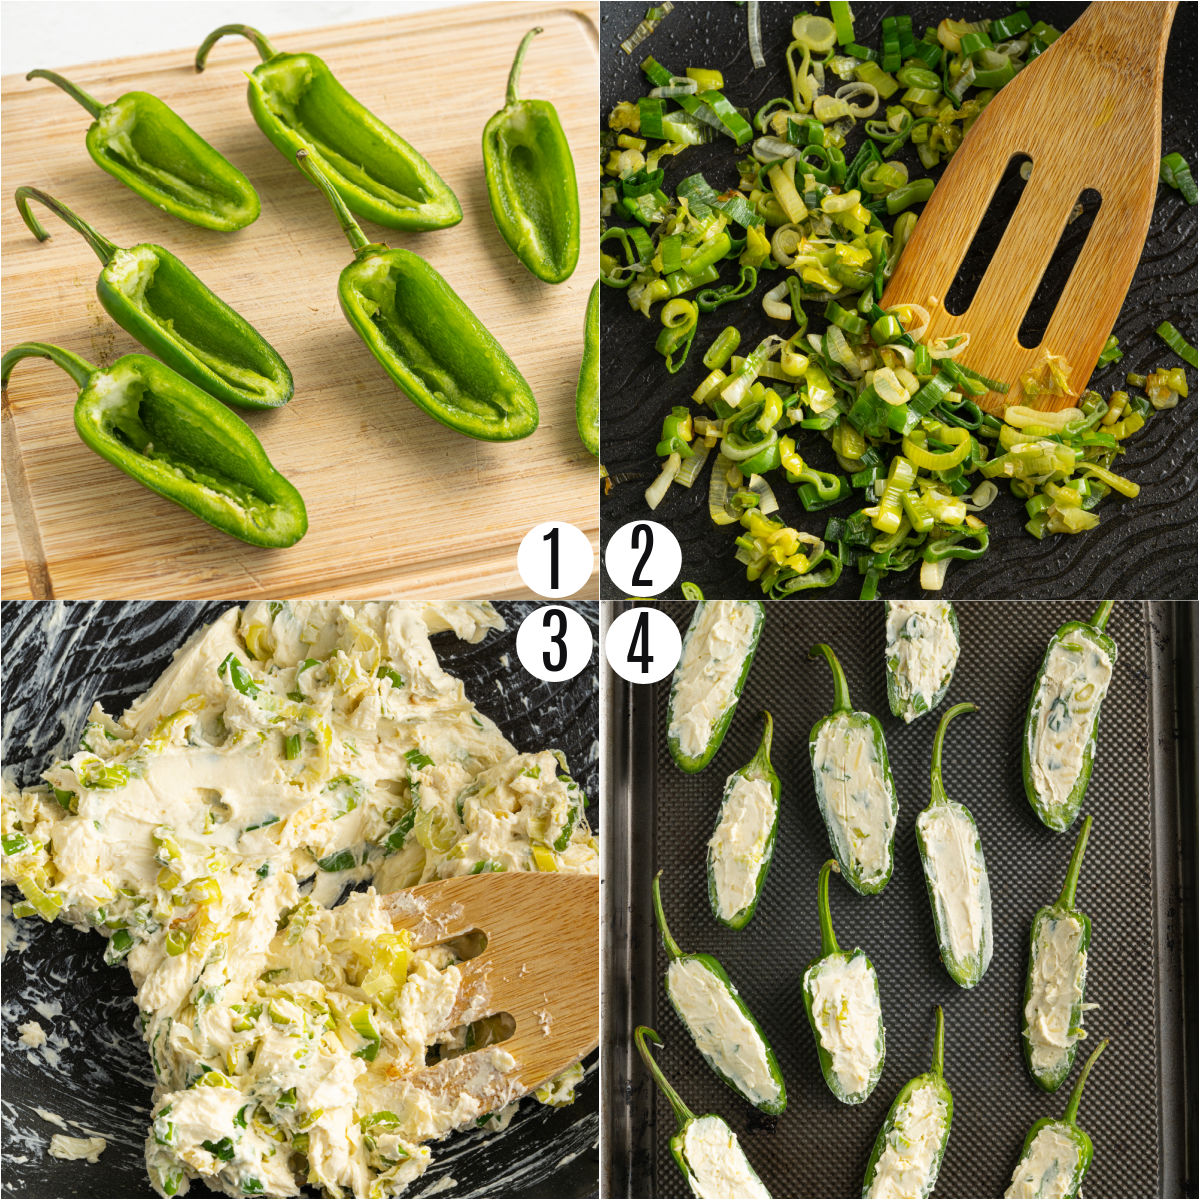 Step by step phtos showing how to make jalapeno poppers. 